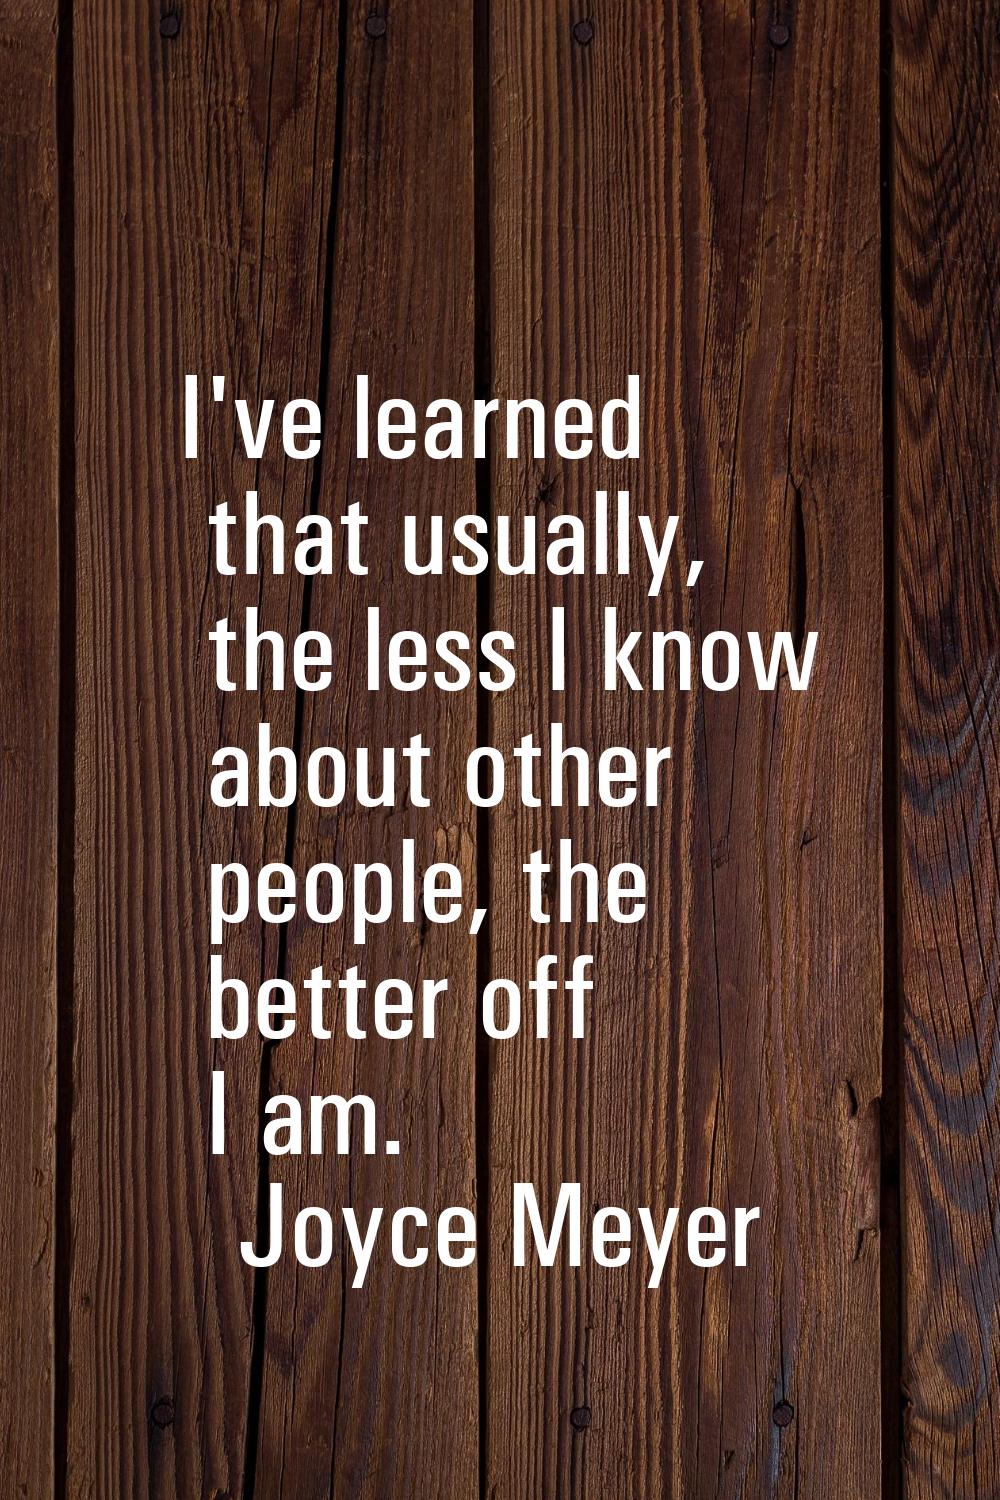 I've learned that usually, the less I know about other people, the better off I am.